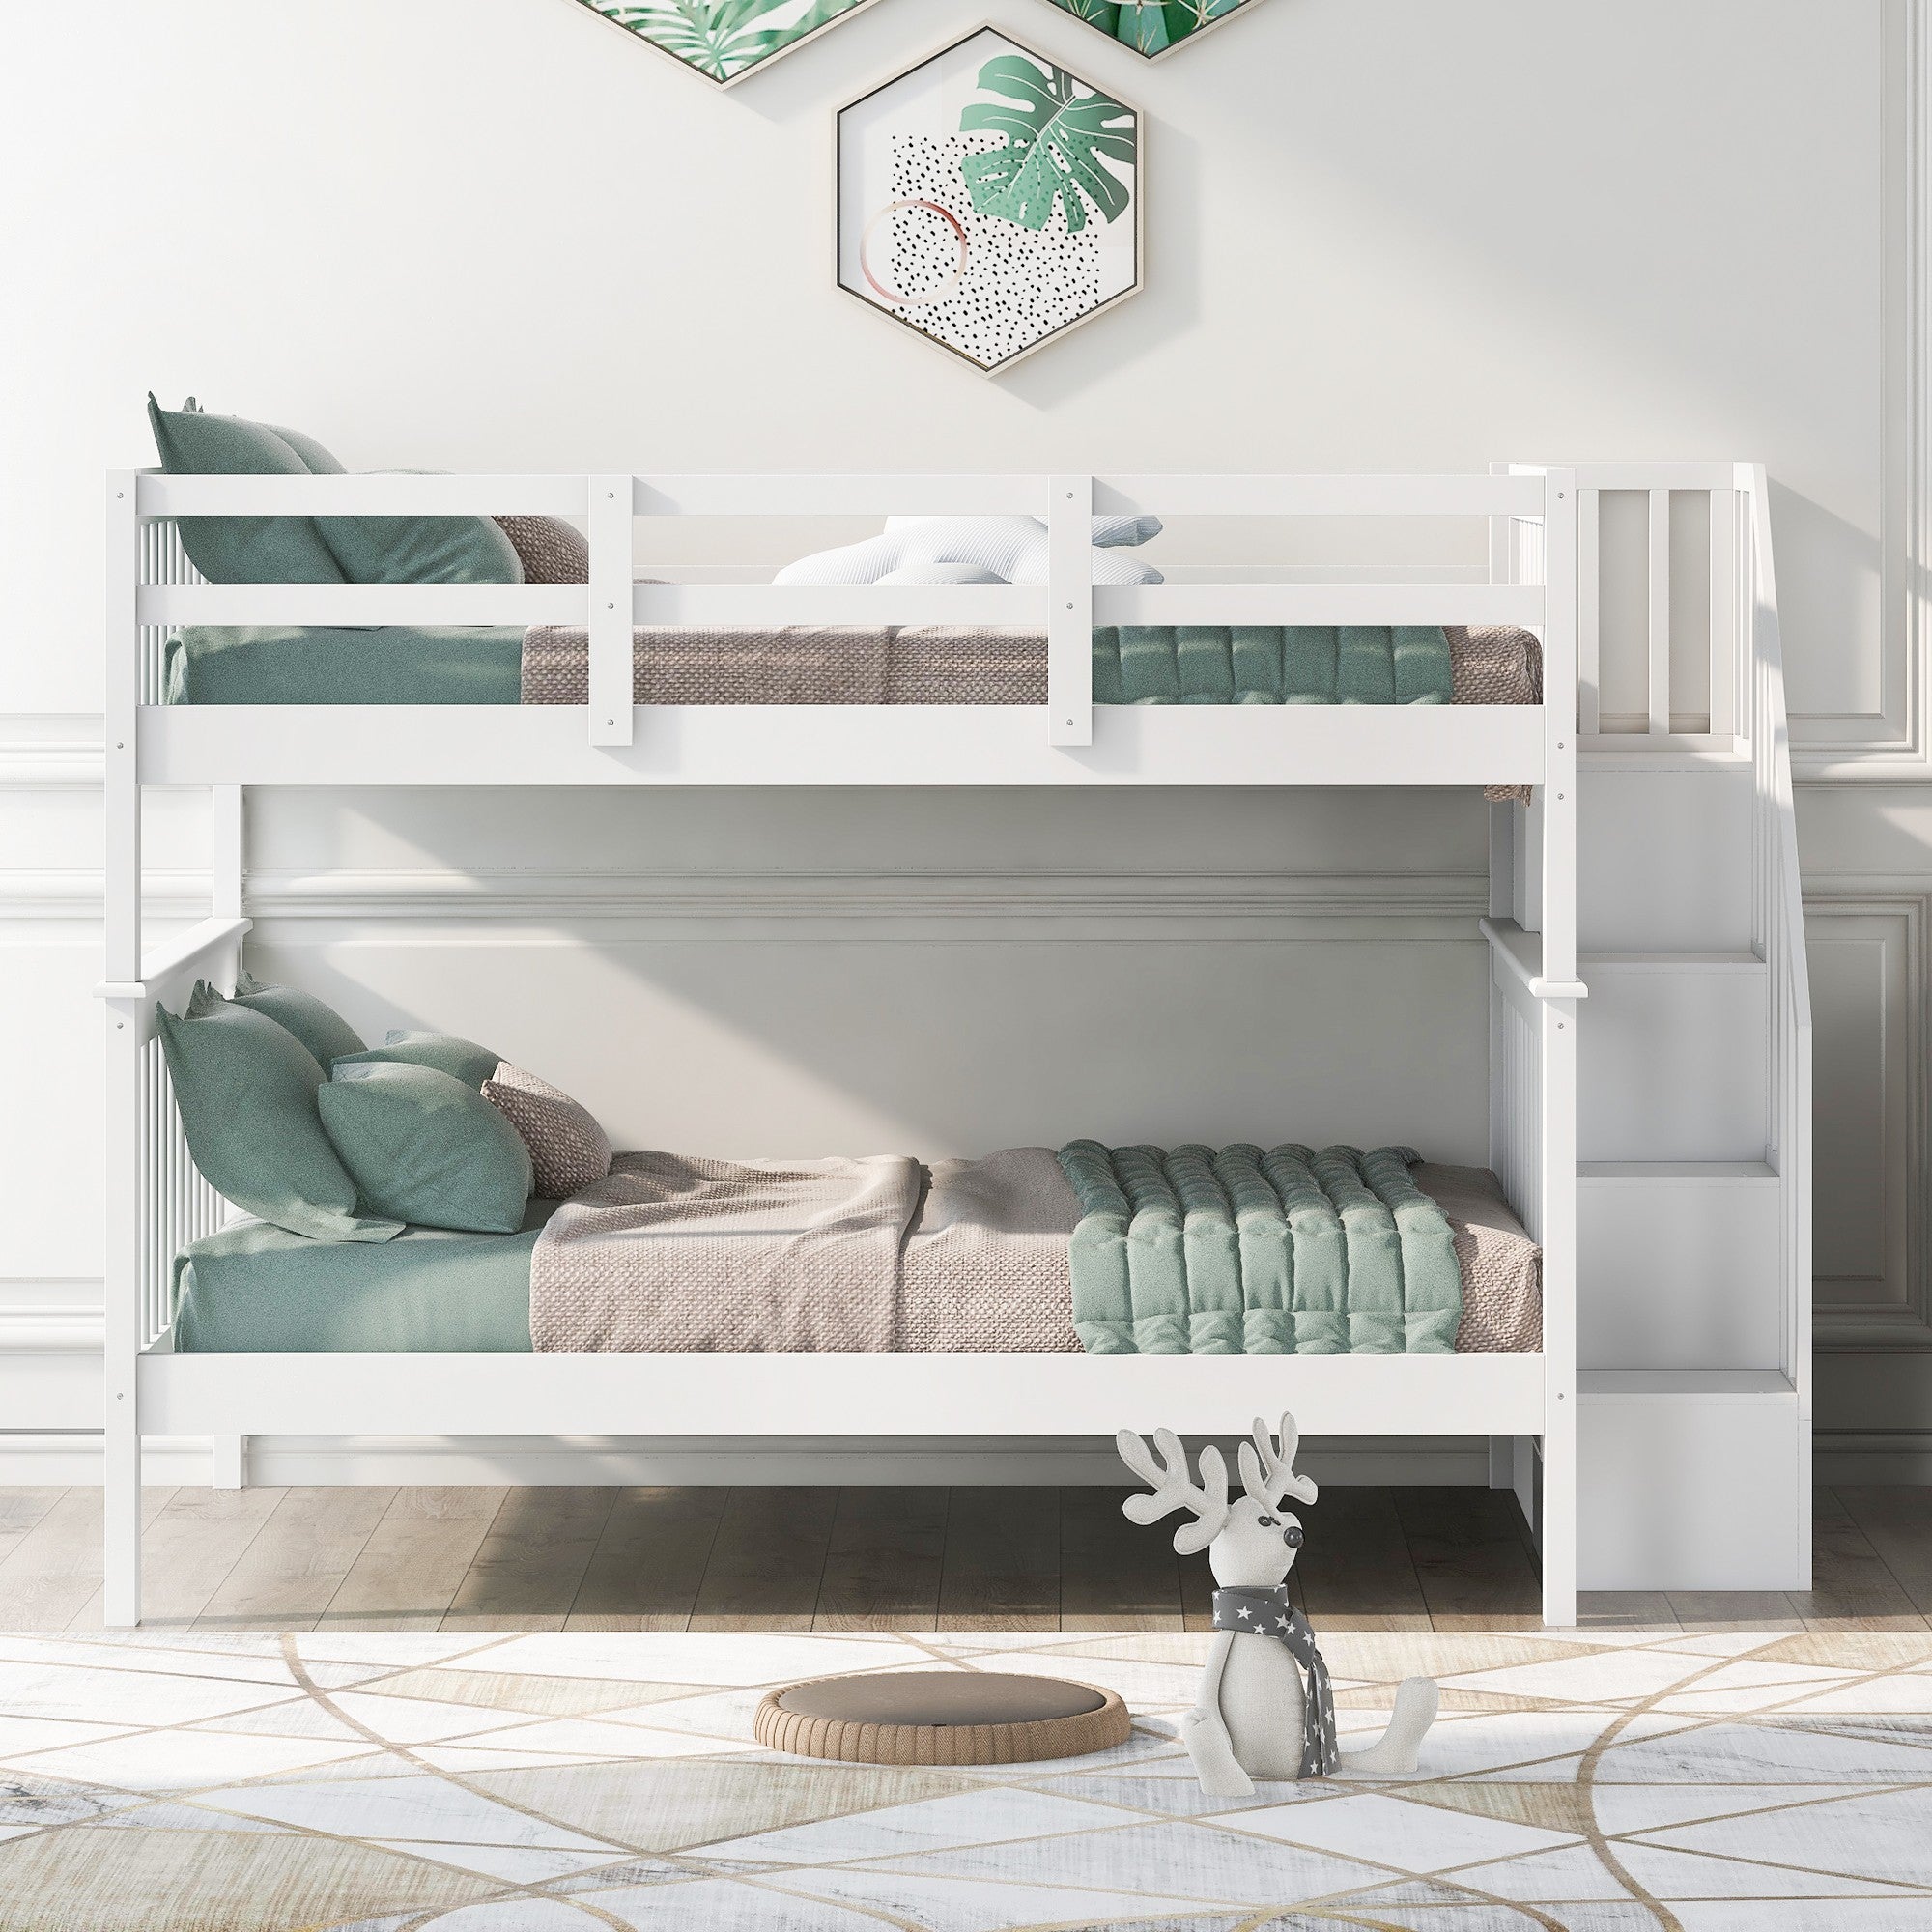 White Double Full Size Stairway Bunk Bed